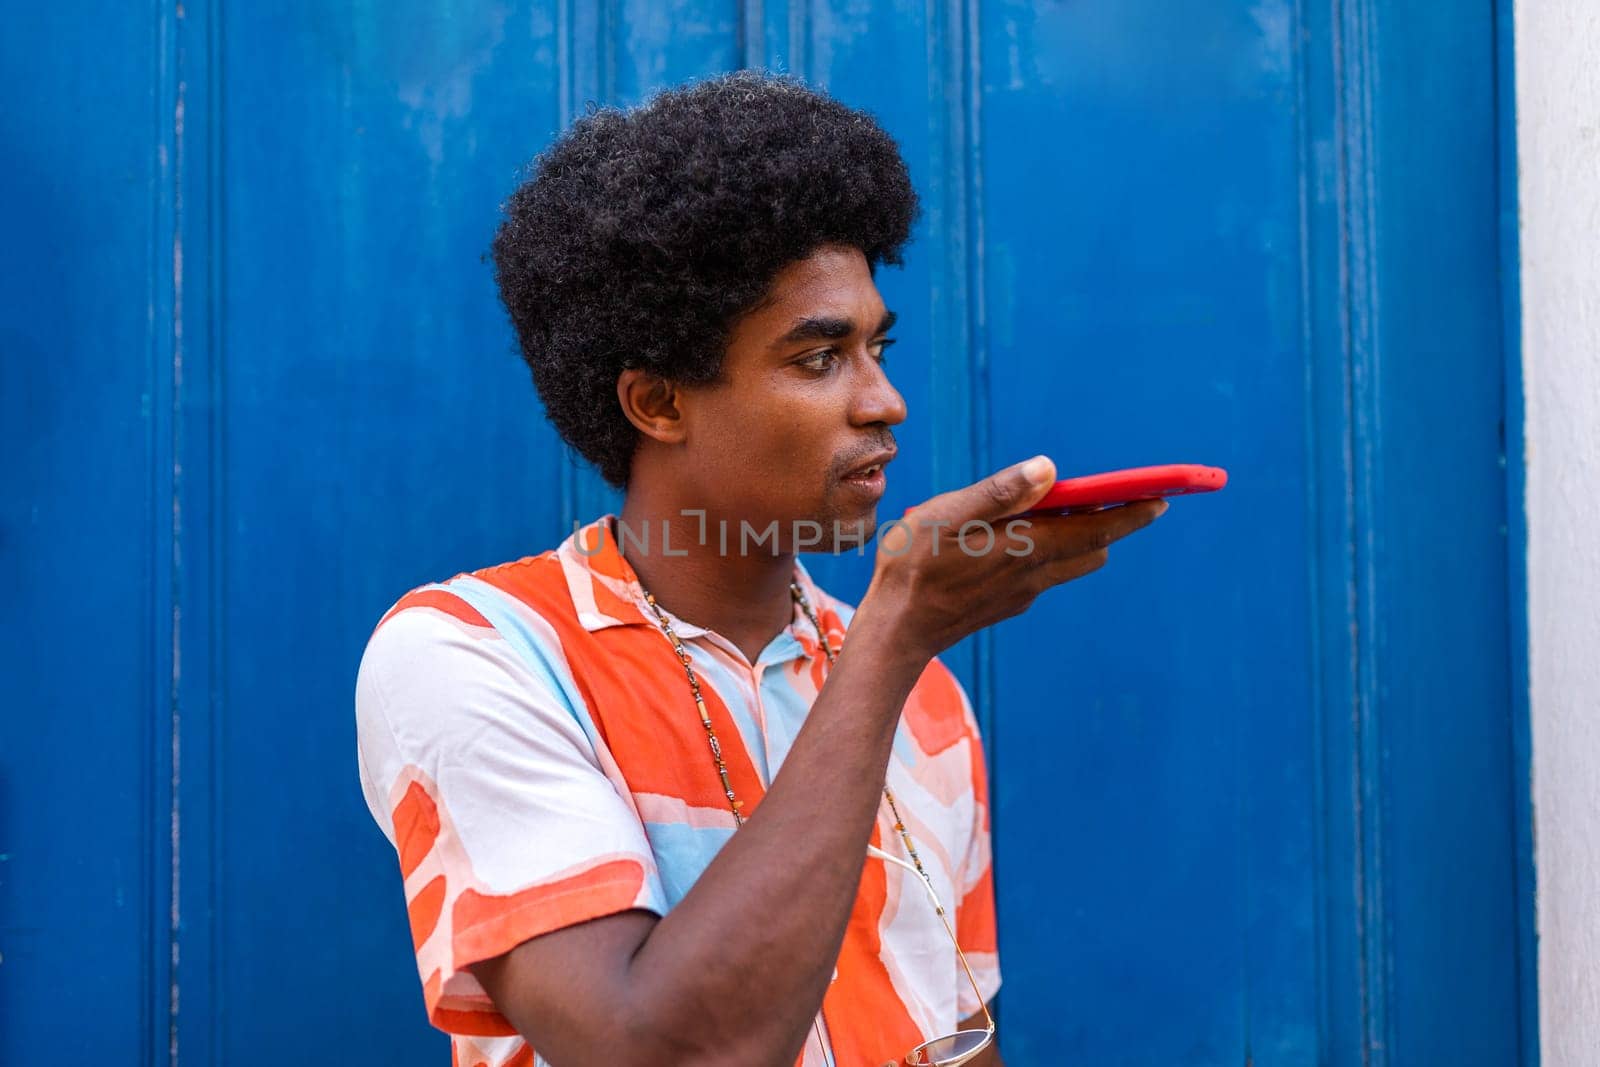 African American man using cell phone to send voice message. Young black man with afro hairstyle talking on the phone. Copy space. Technology concept.